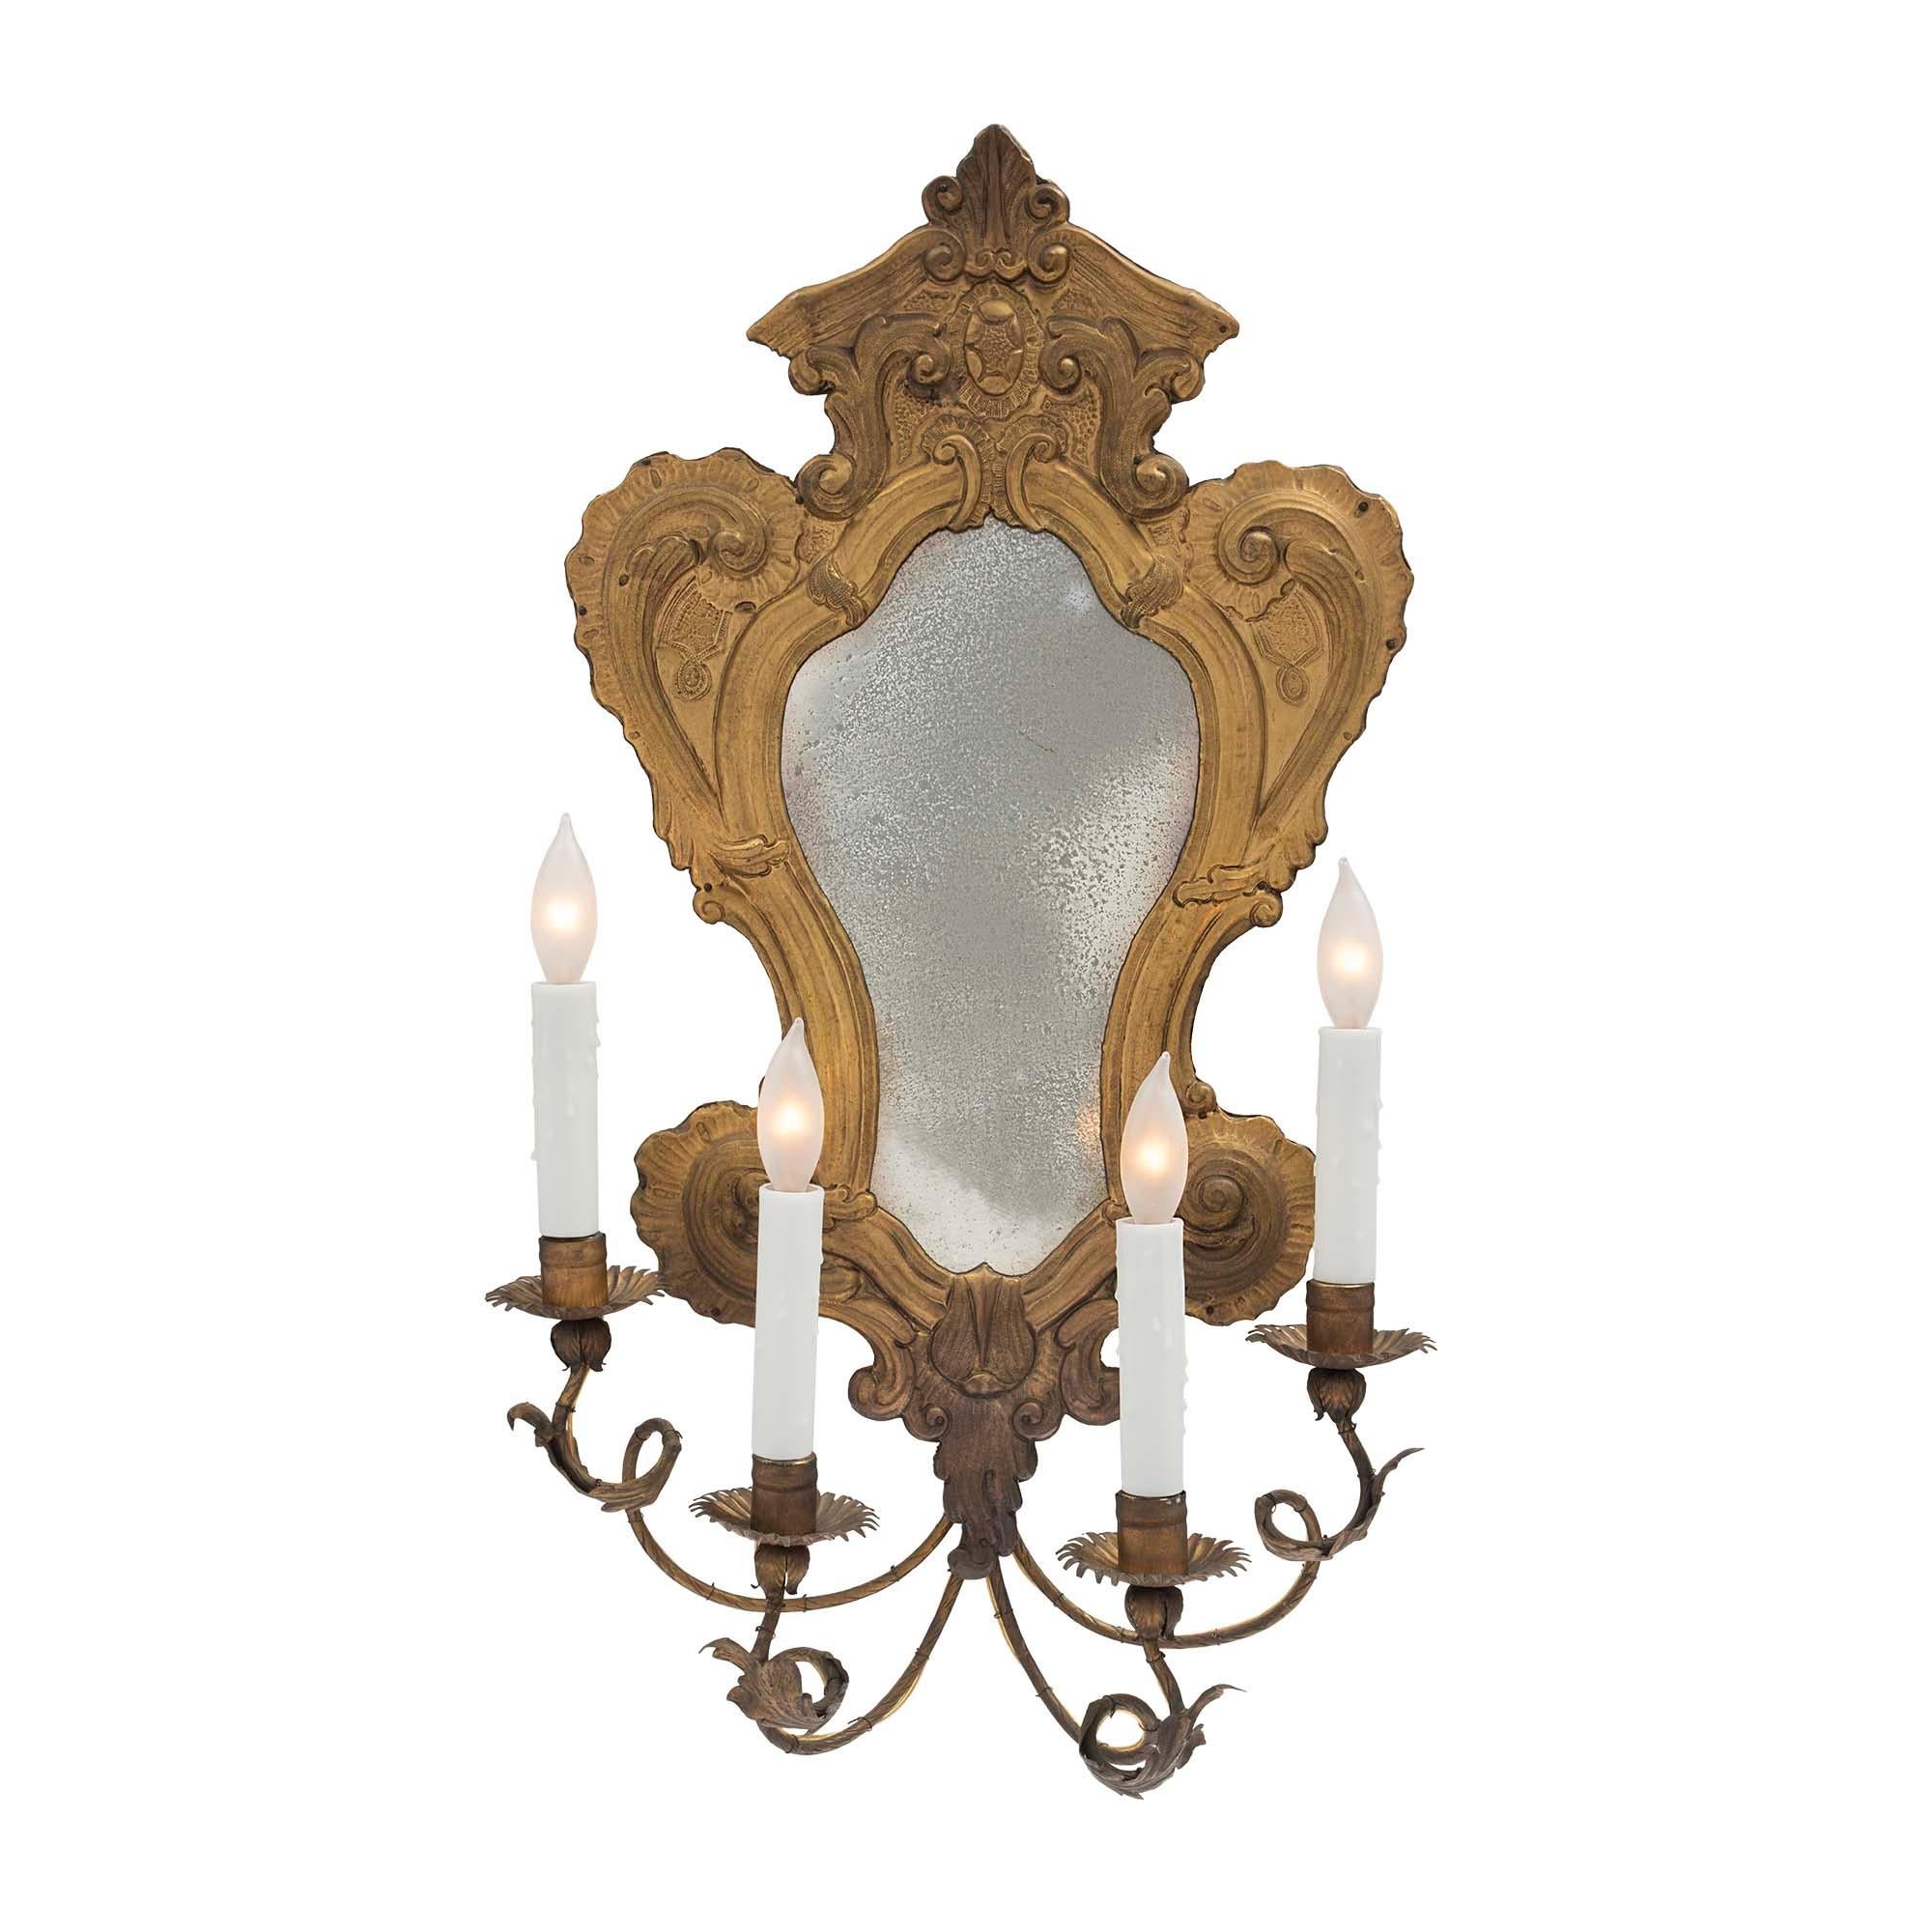 A very attractive and complete set of four Italian turn of the century Louis XV st. pressed brass mirrored sconces. Each sconce displays a top central crown with scrolls flanked by a serpentine shaped design surrounding a period mirror plate. The